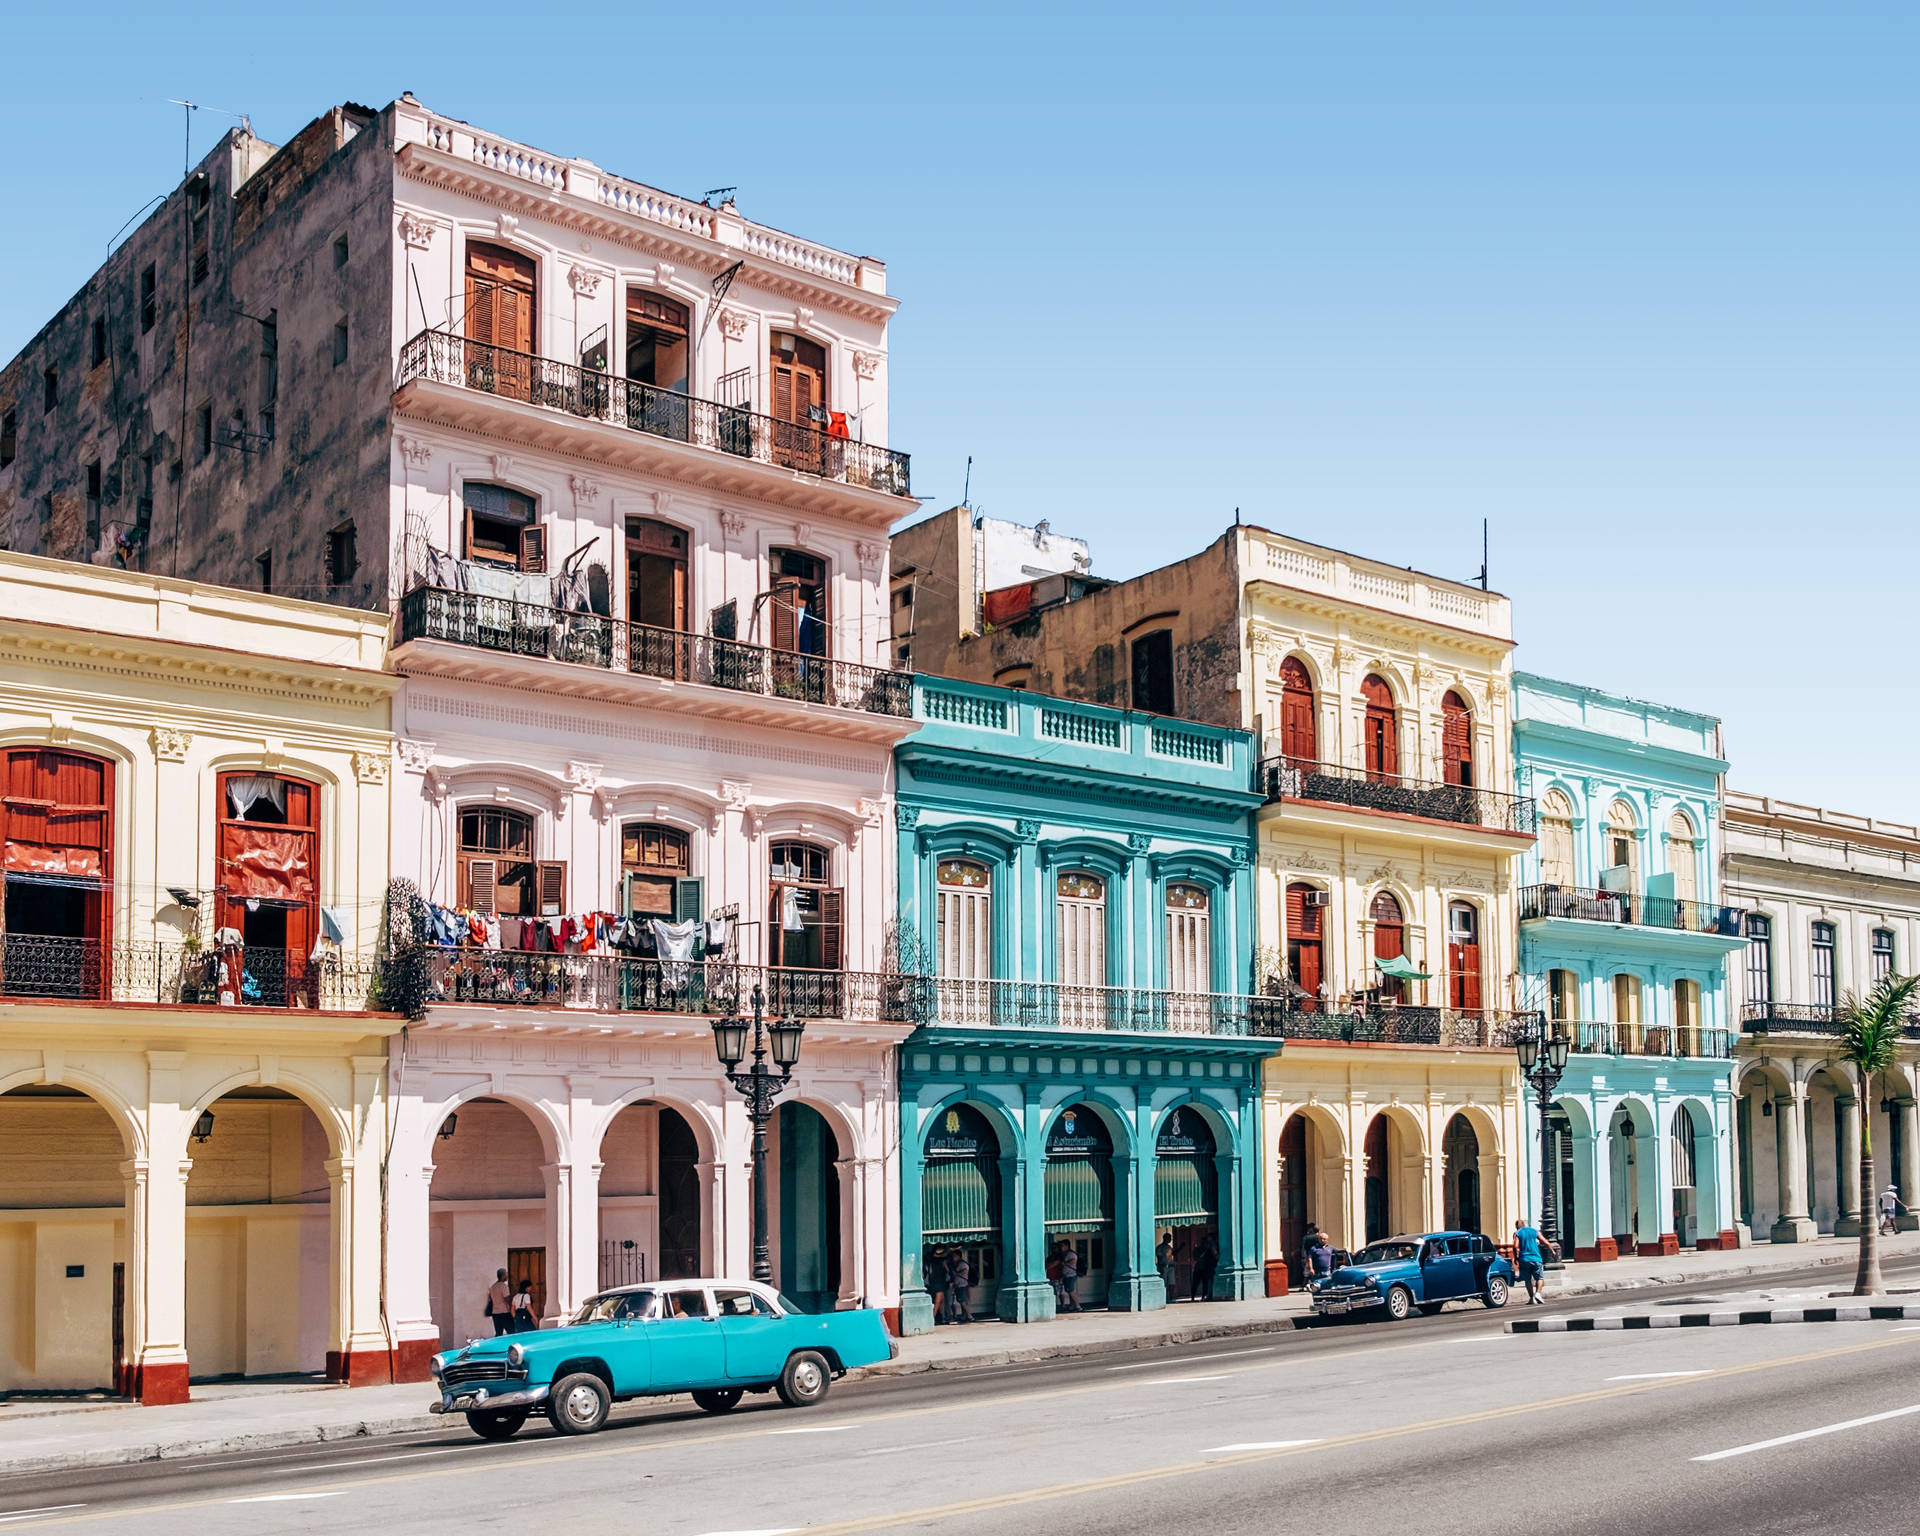 Architectural Buildings In Cuba Background